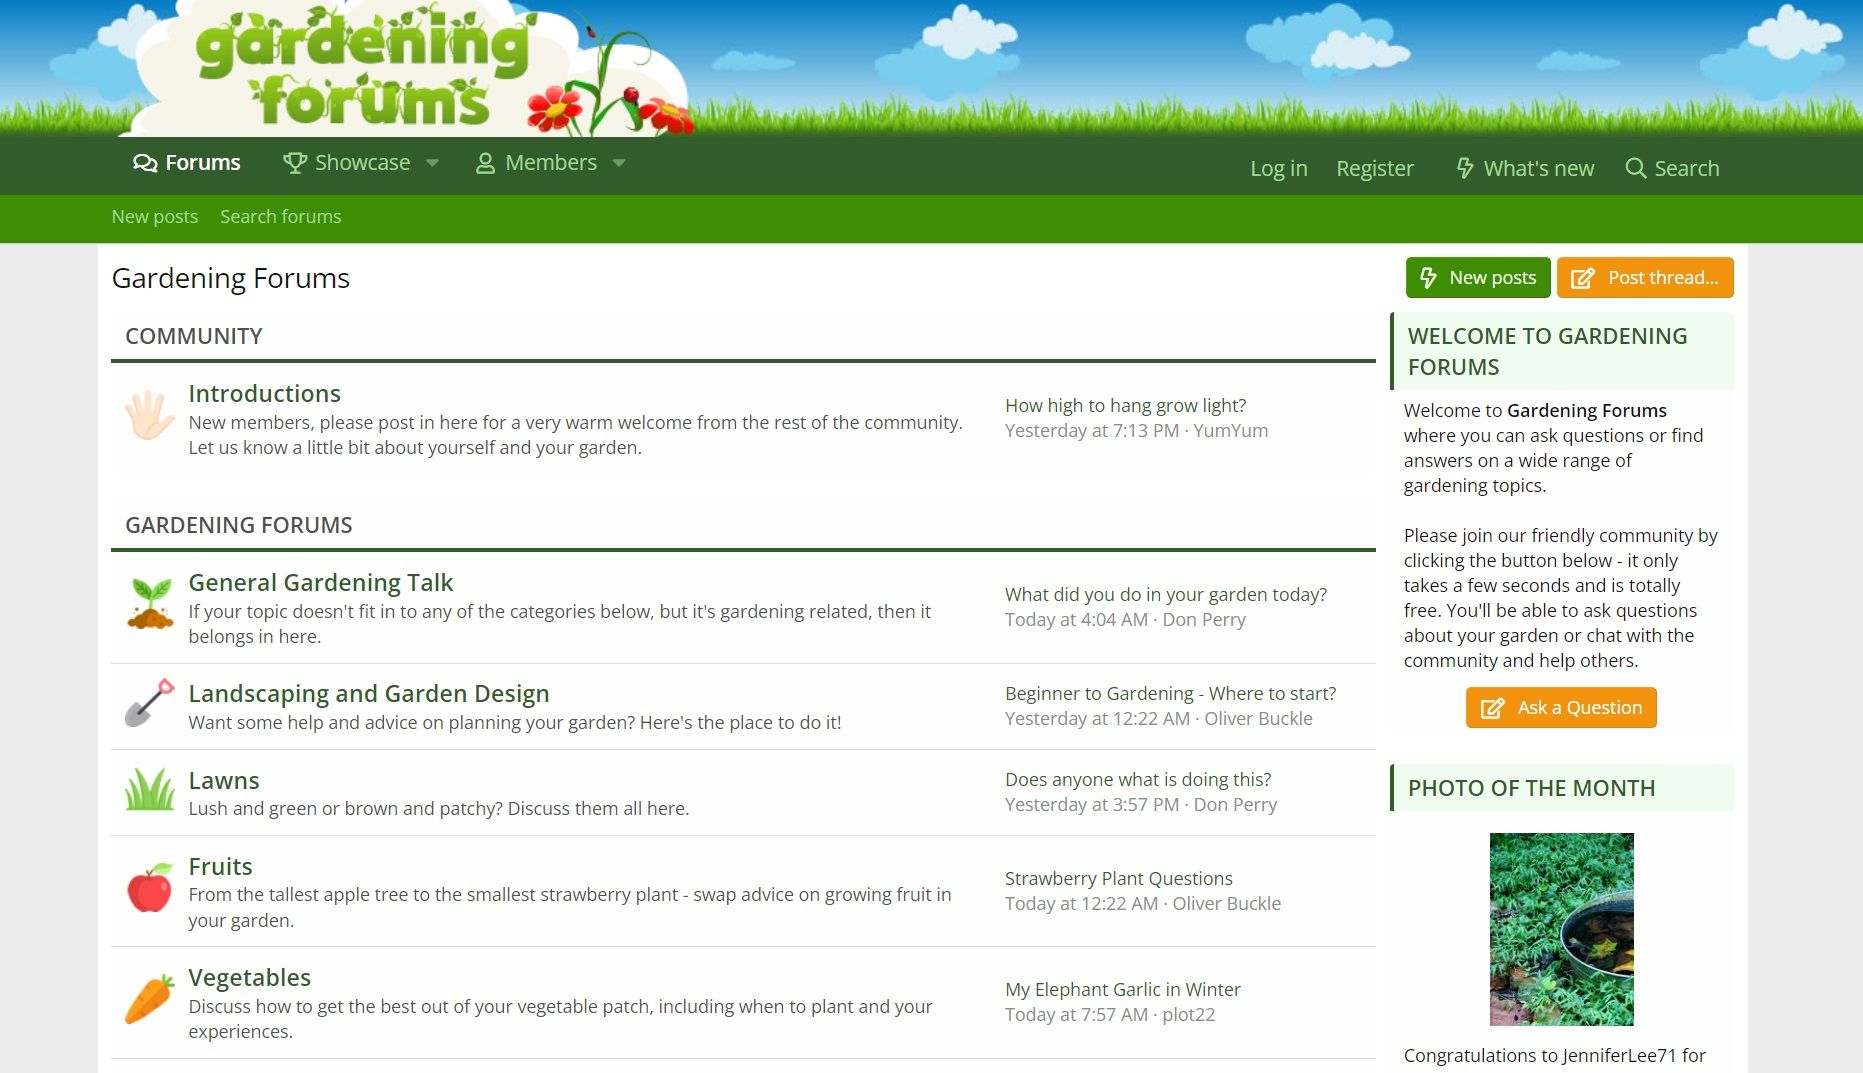 Gardening Forums community page